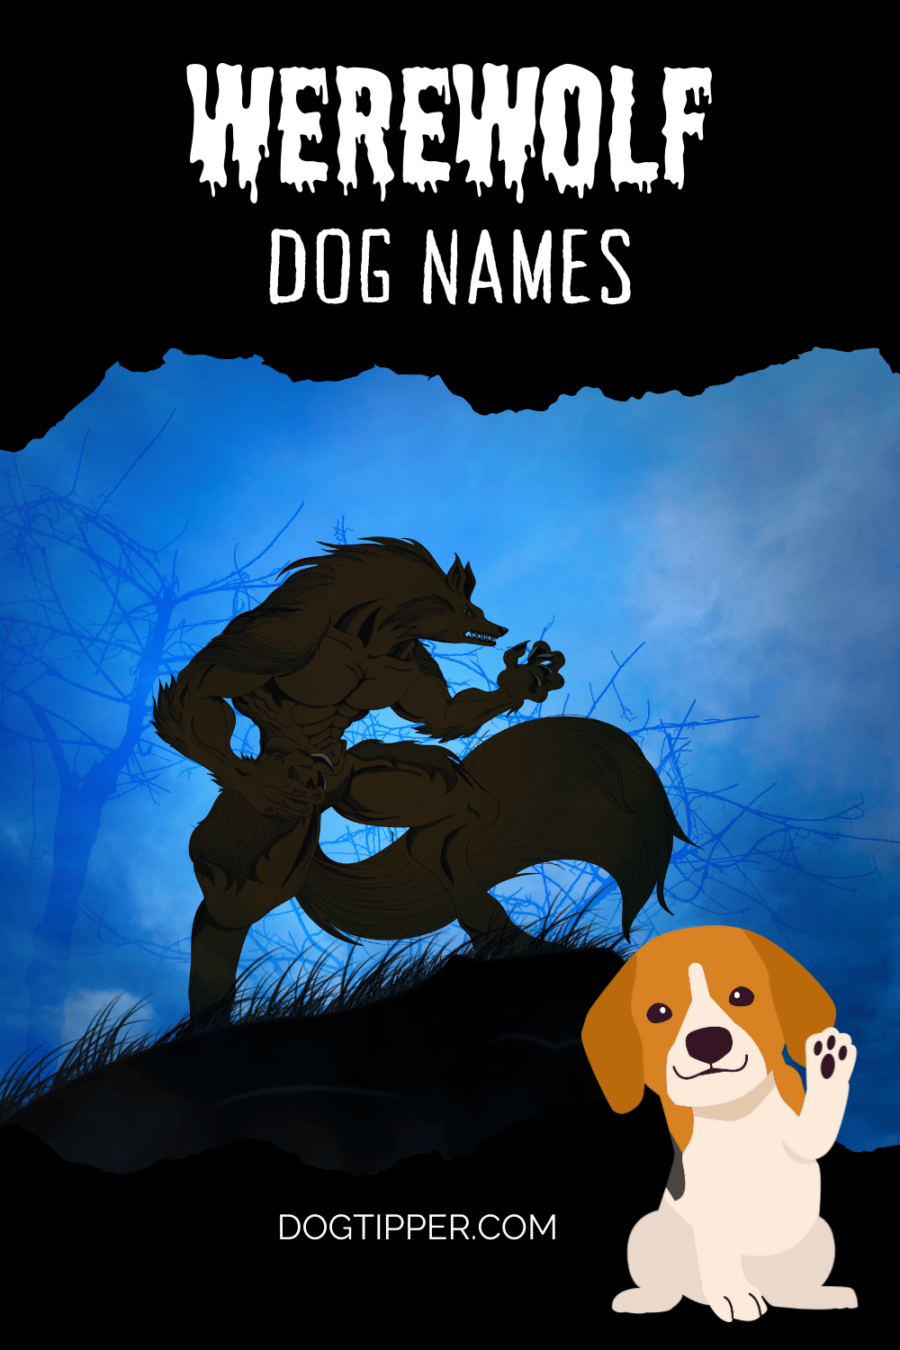 113 Werewolf Dog Names to Make You Howl! #dognames #dogs 